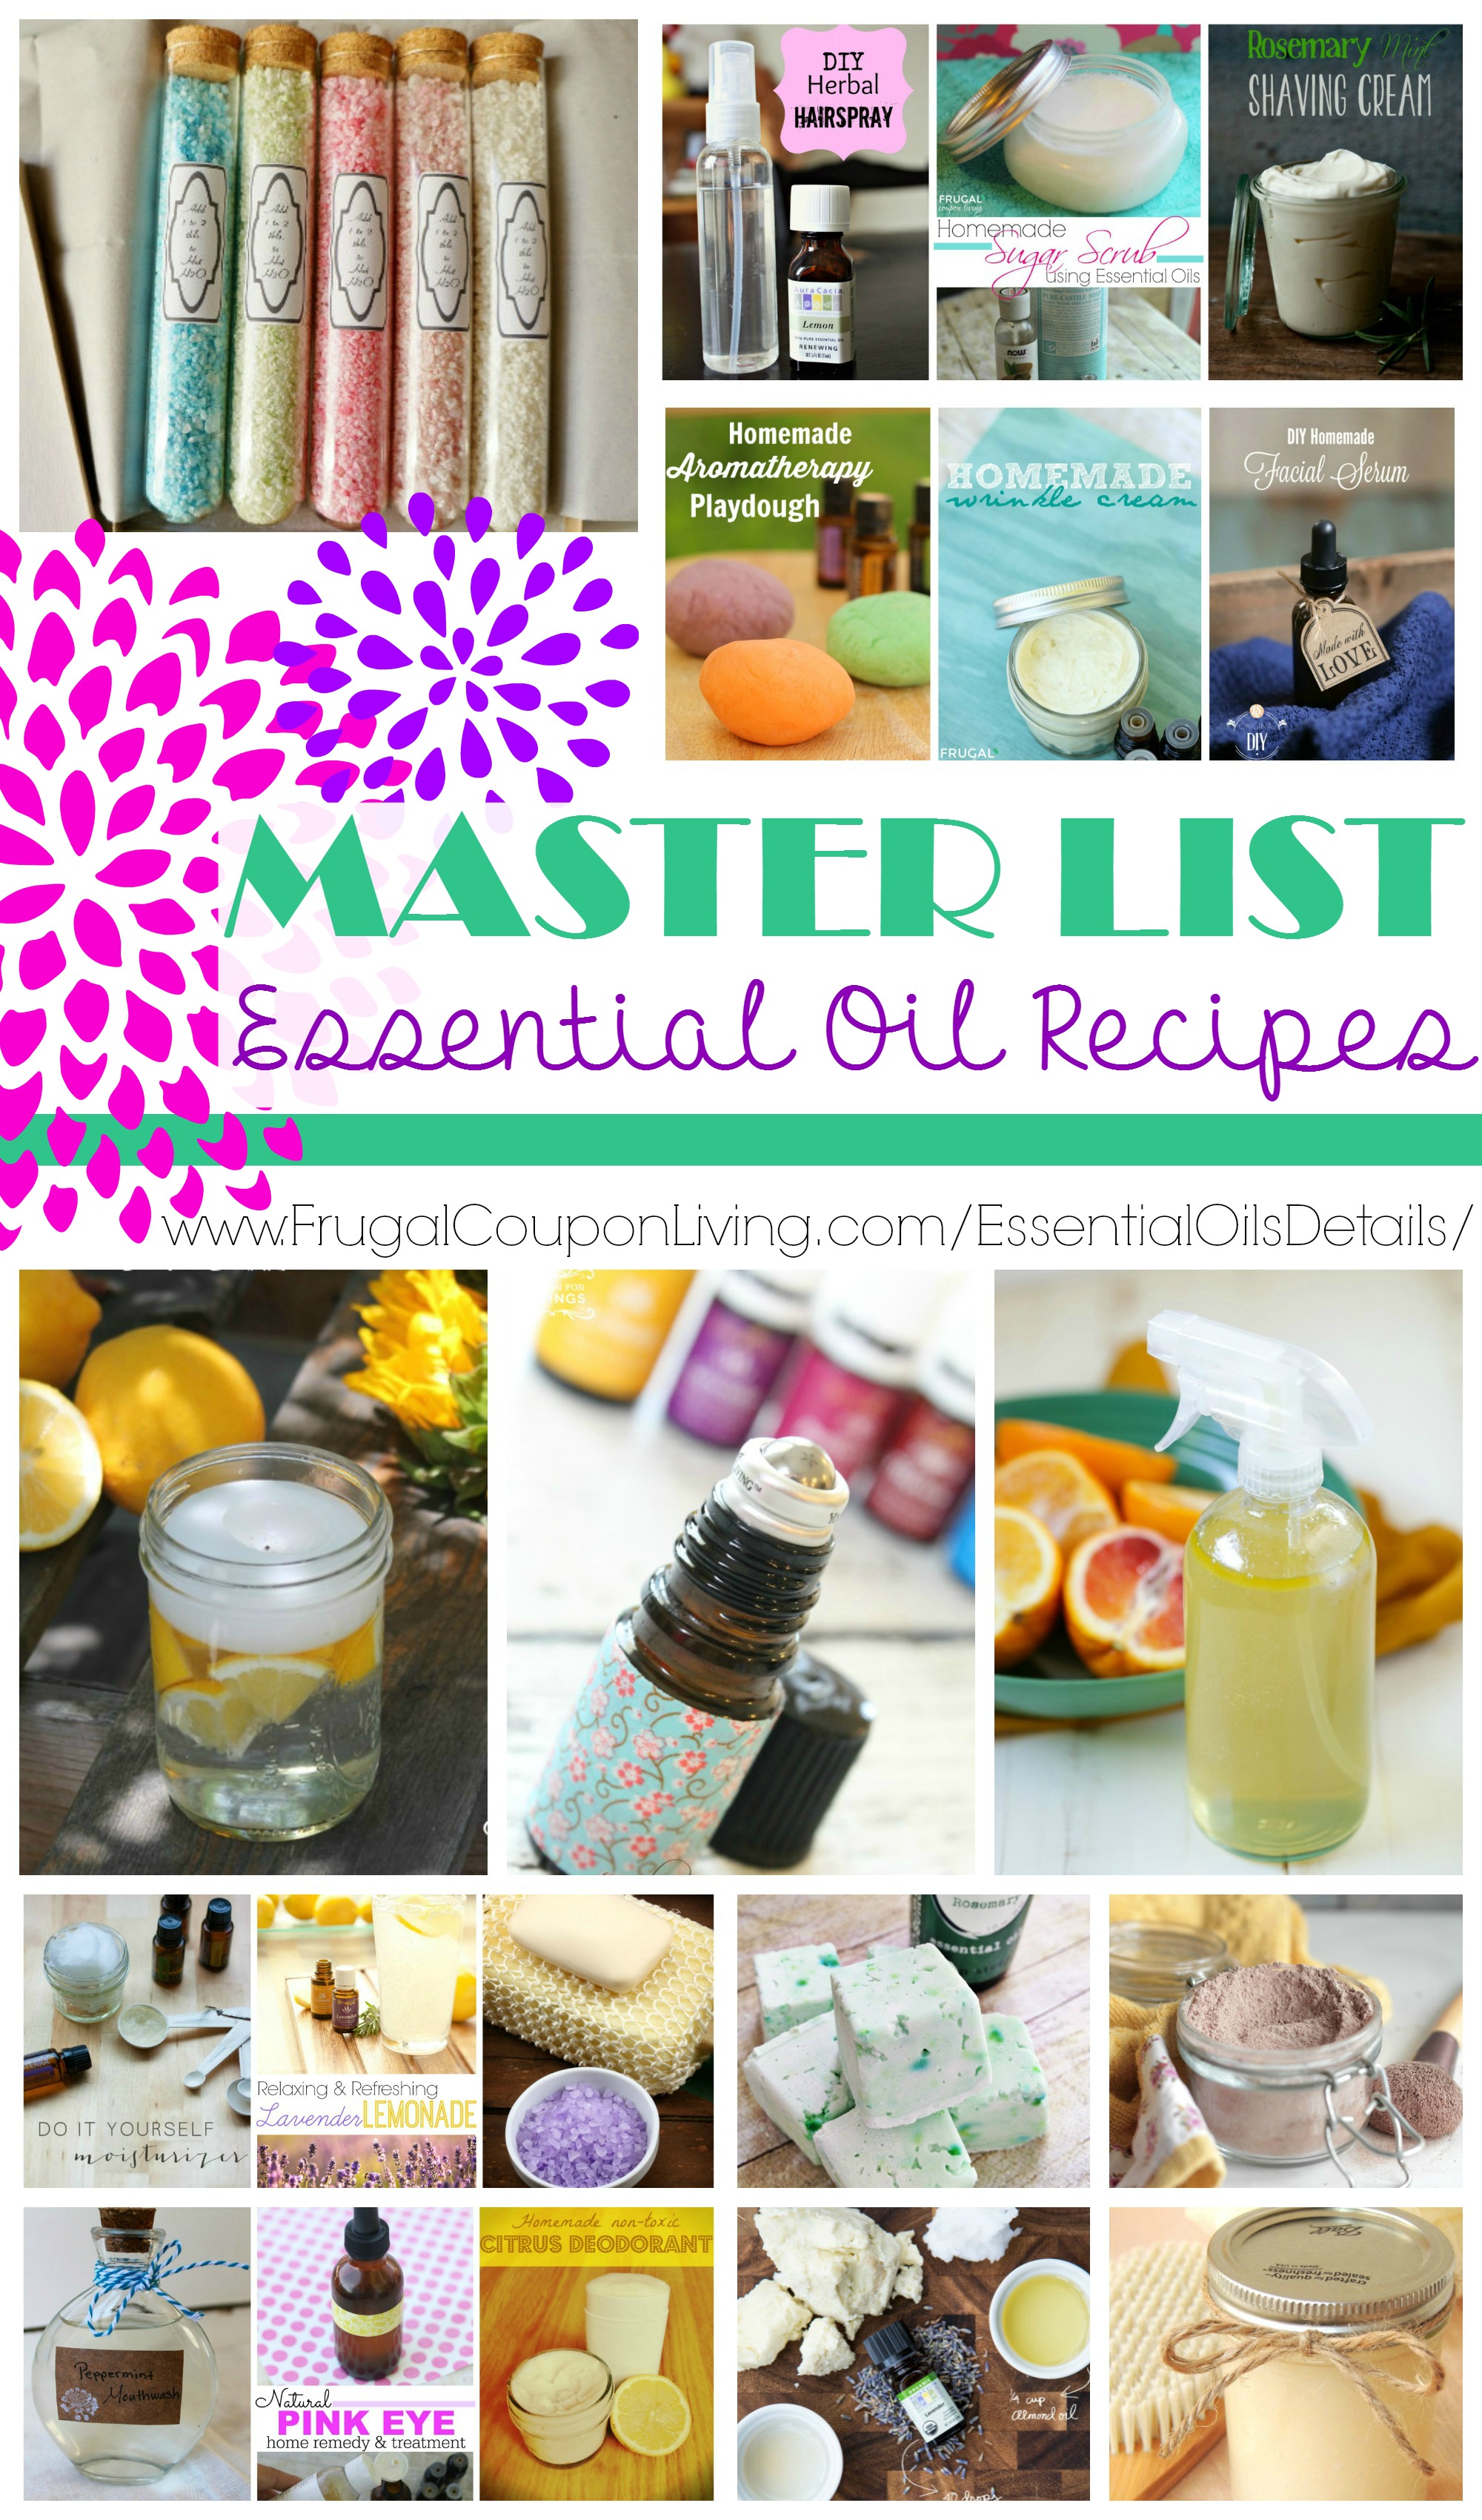 Master-List-Essential-Oil-Recipes-Collage-Frugal-Coupon-Living